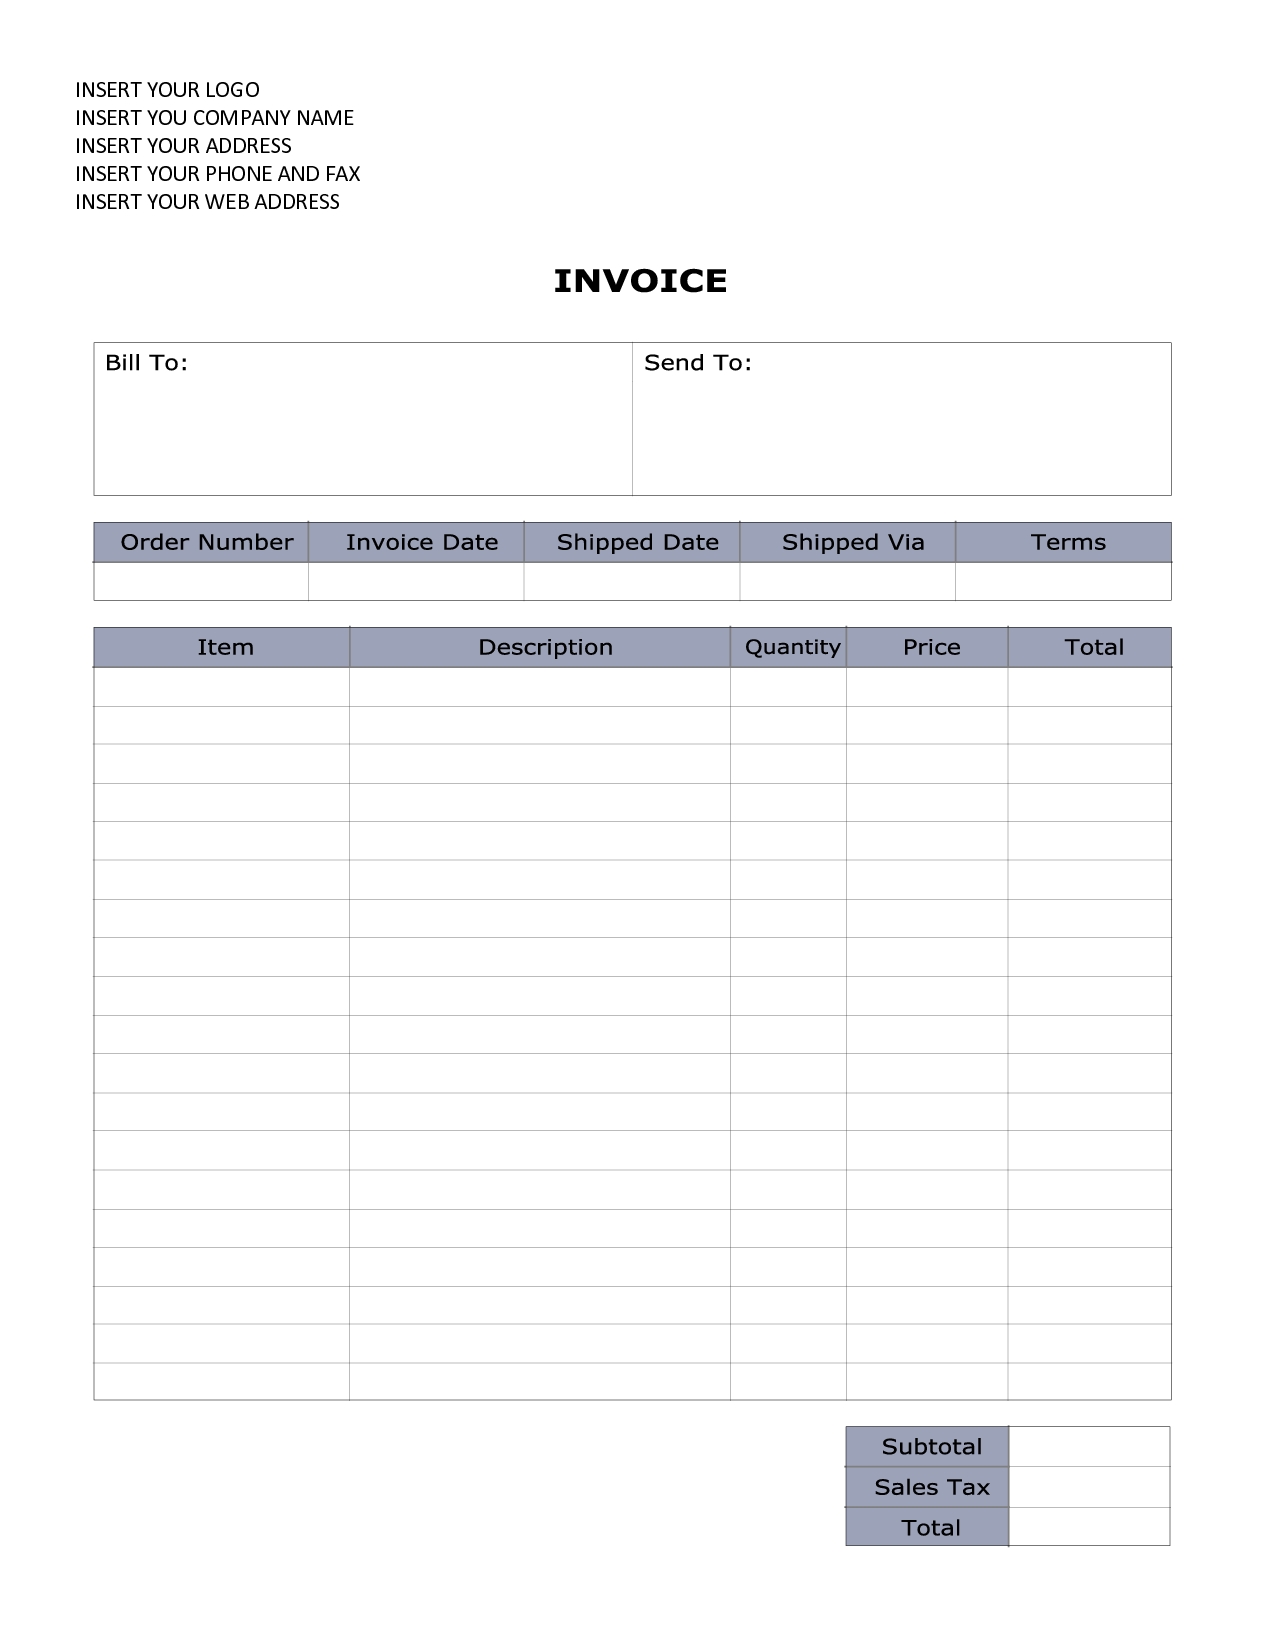 free invoice software free invoice template create free invoice online